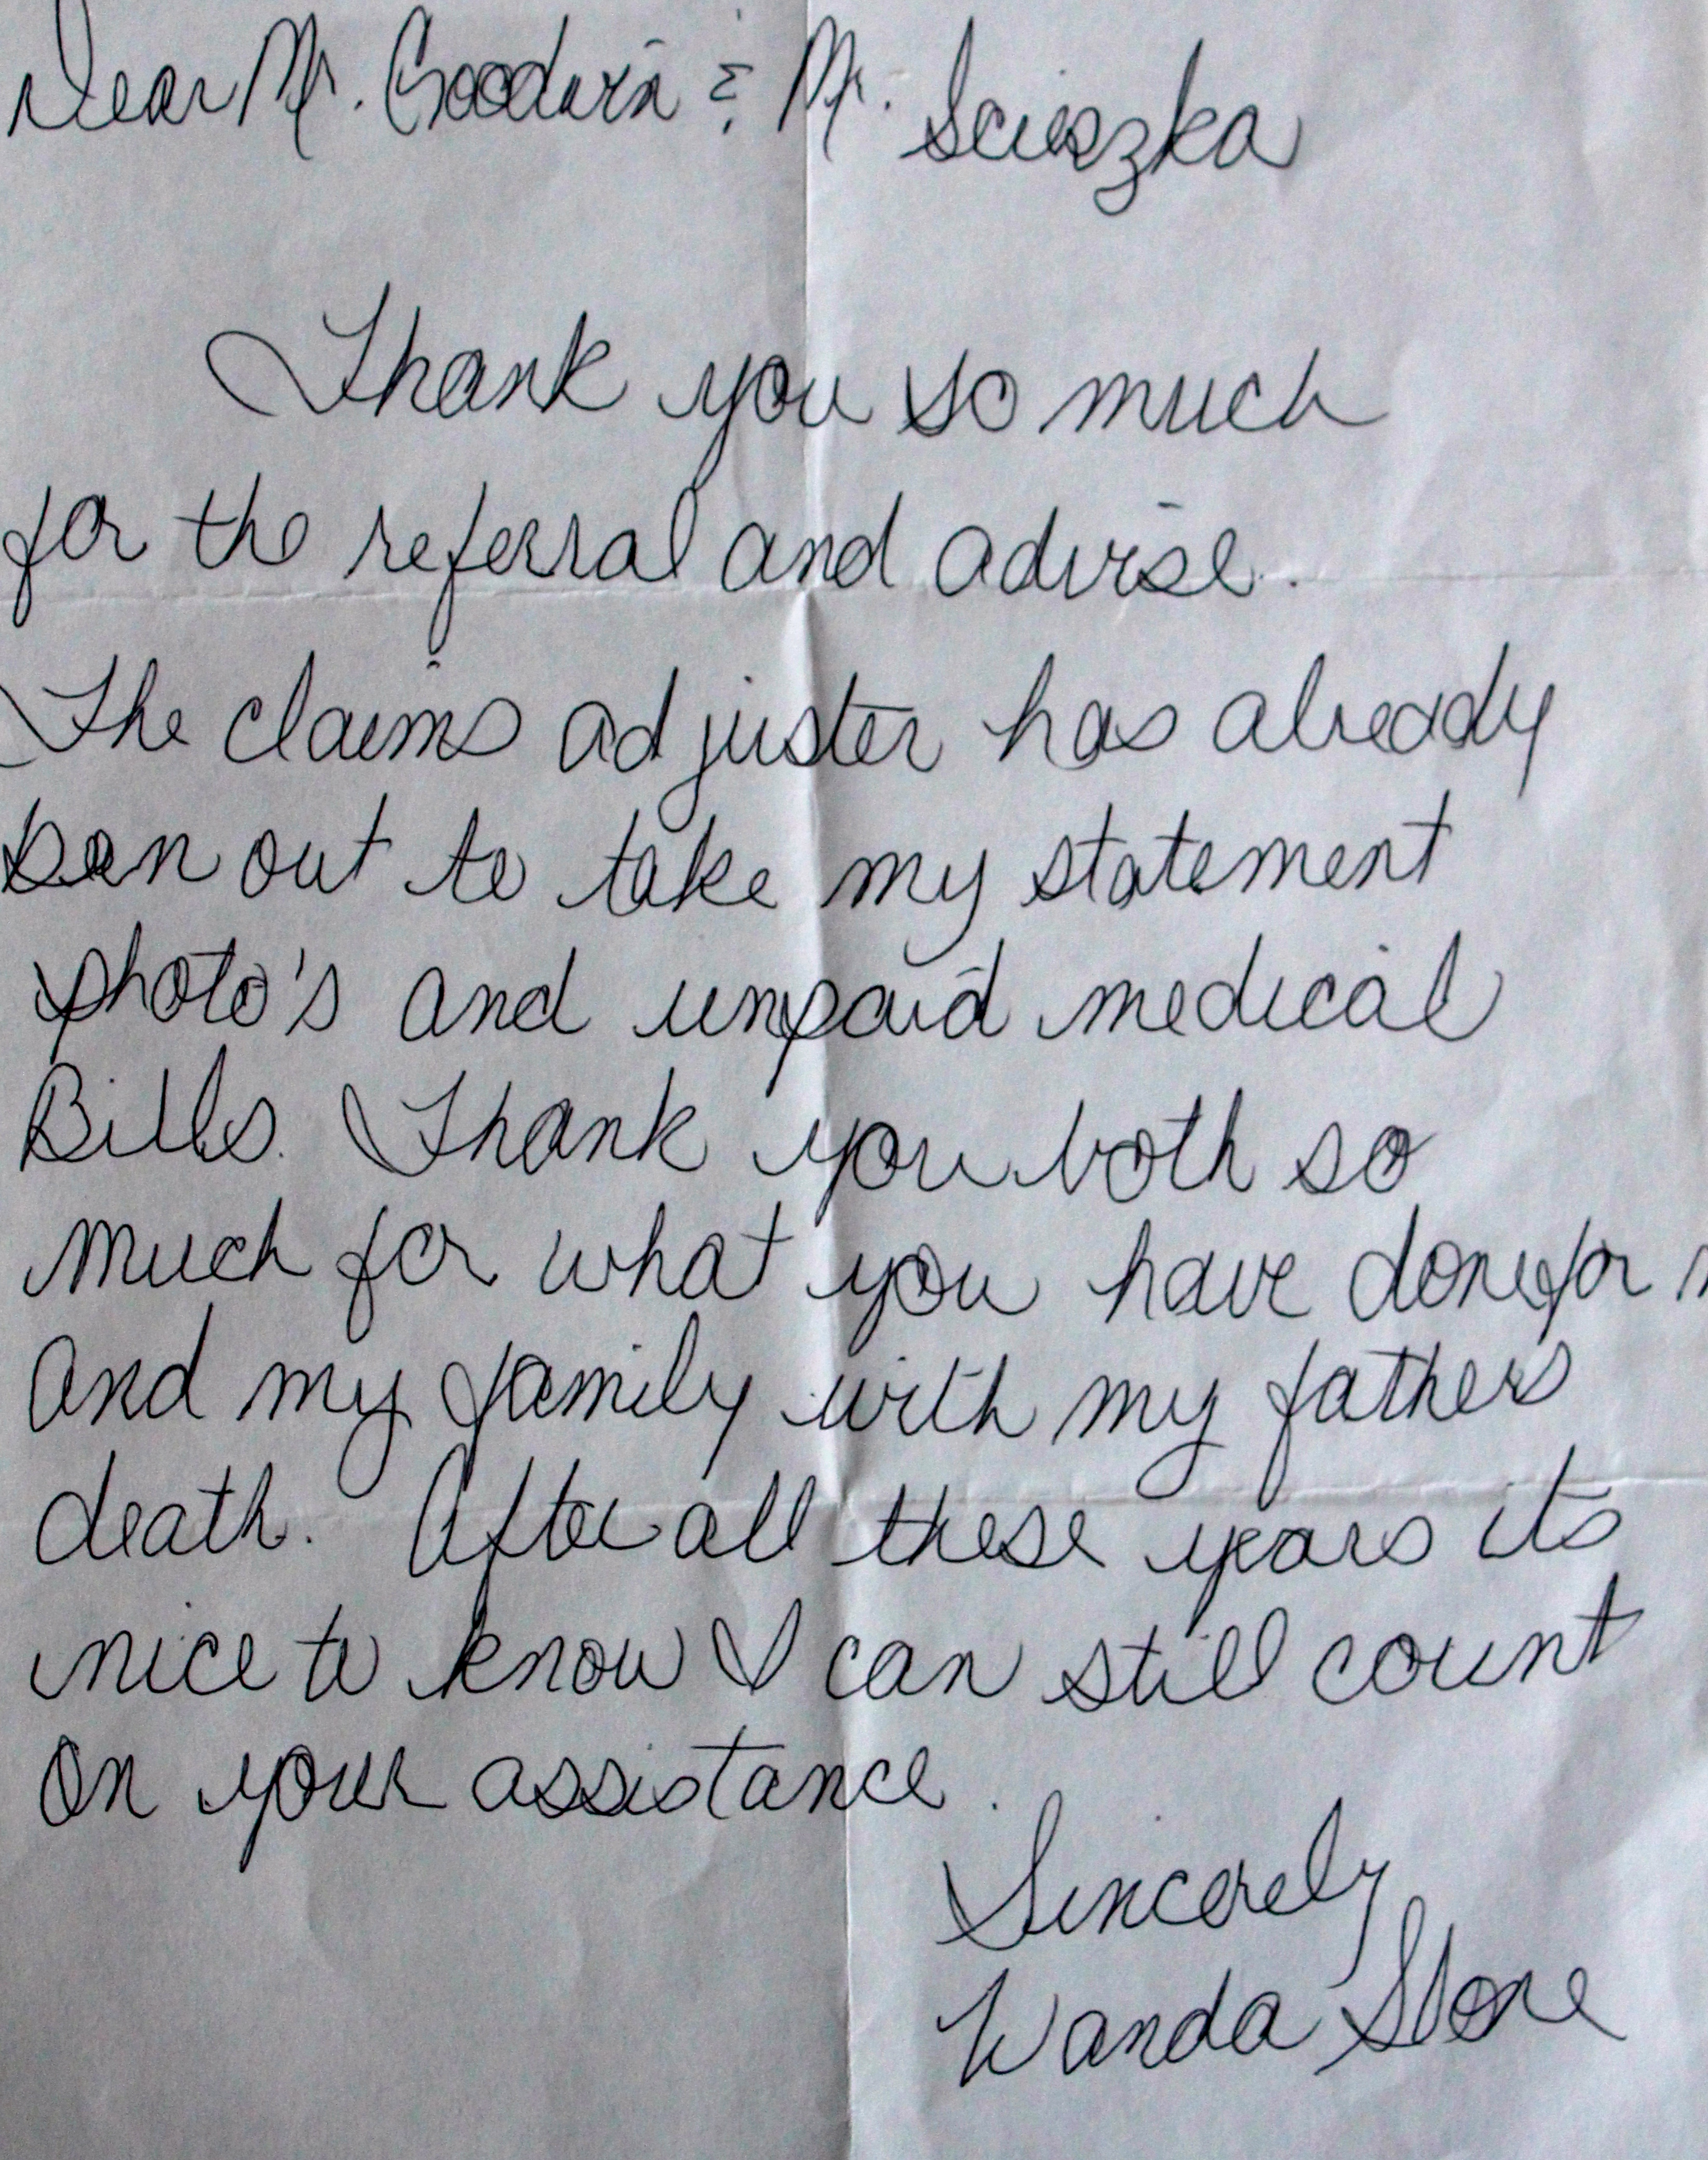 How do you write a thank-you letter for a scholarship?